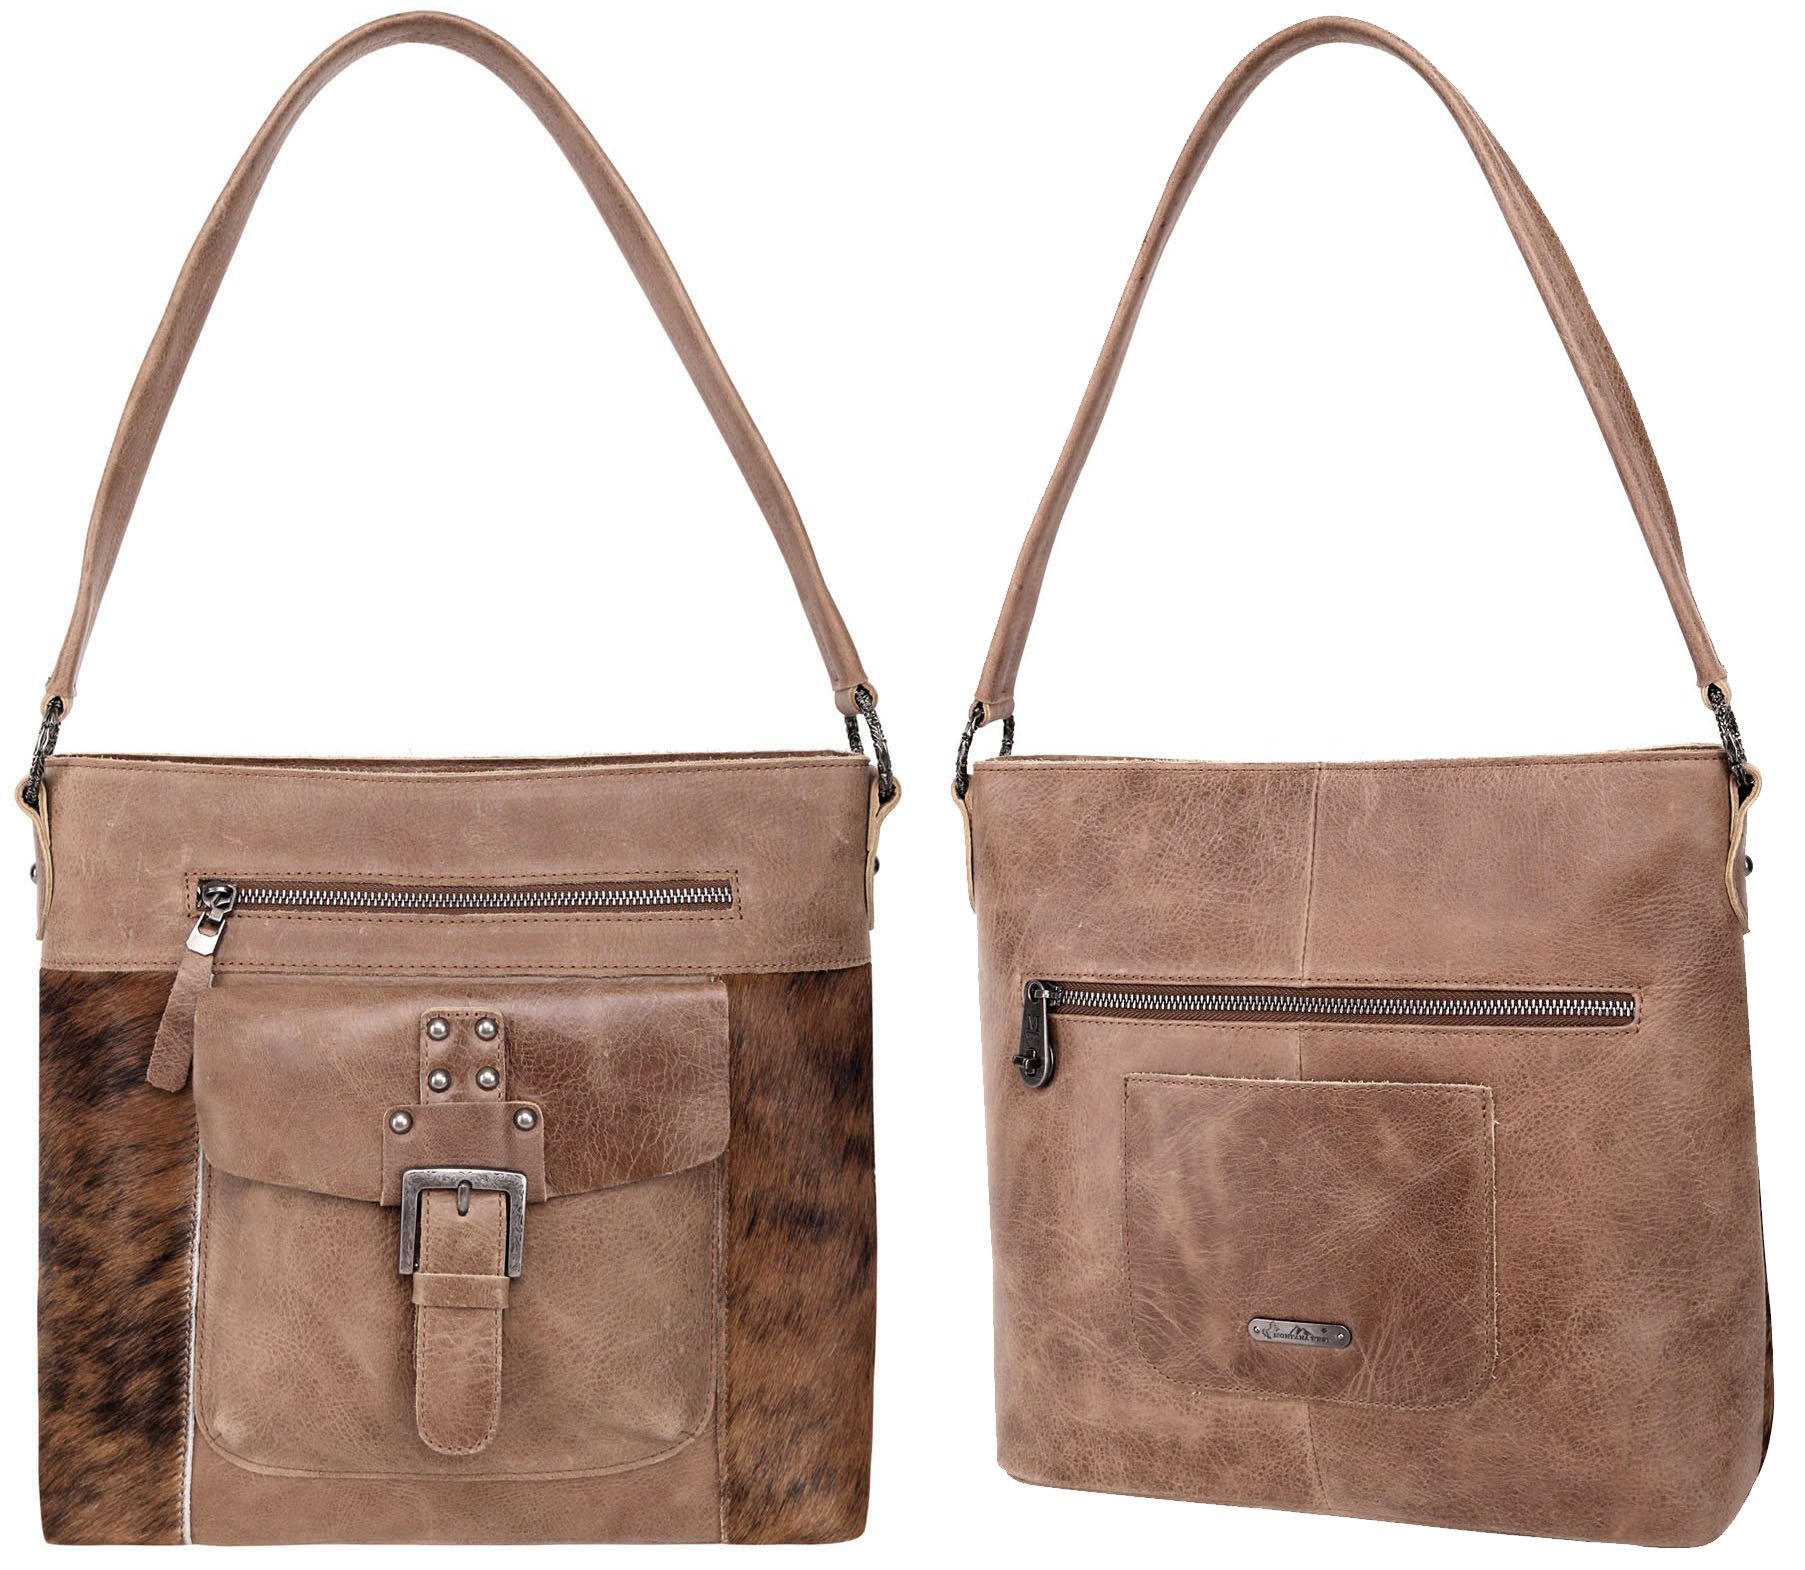 Made from luxurious genuine hair-on cowhide leather, the Montana West hobo features multiple pockets and an easily accessible main compartment